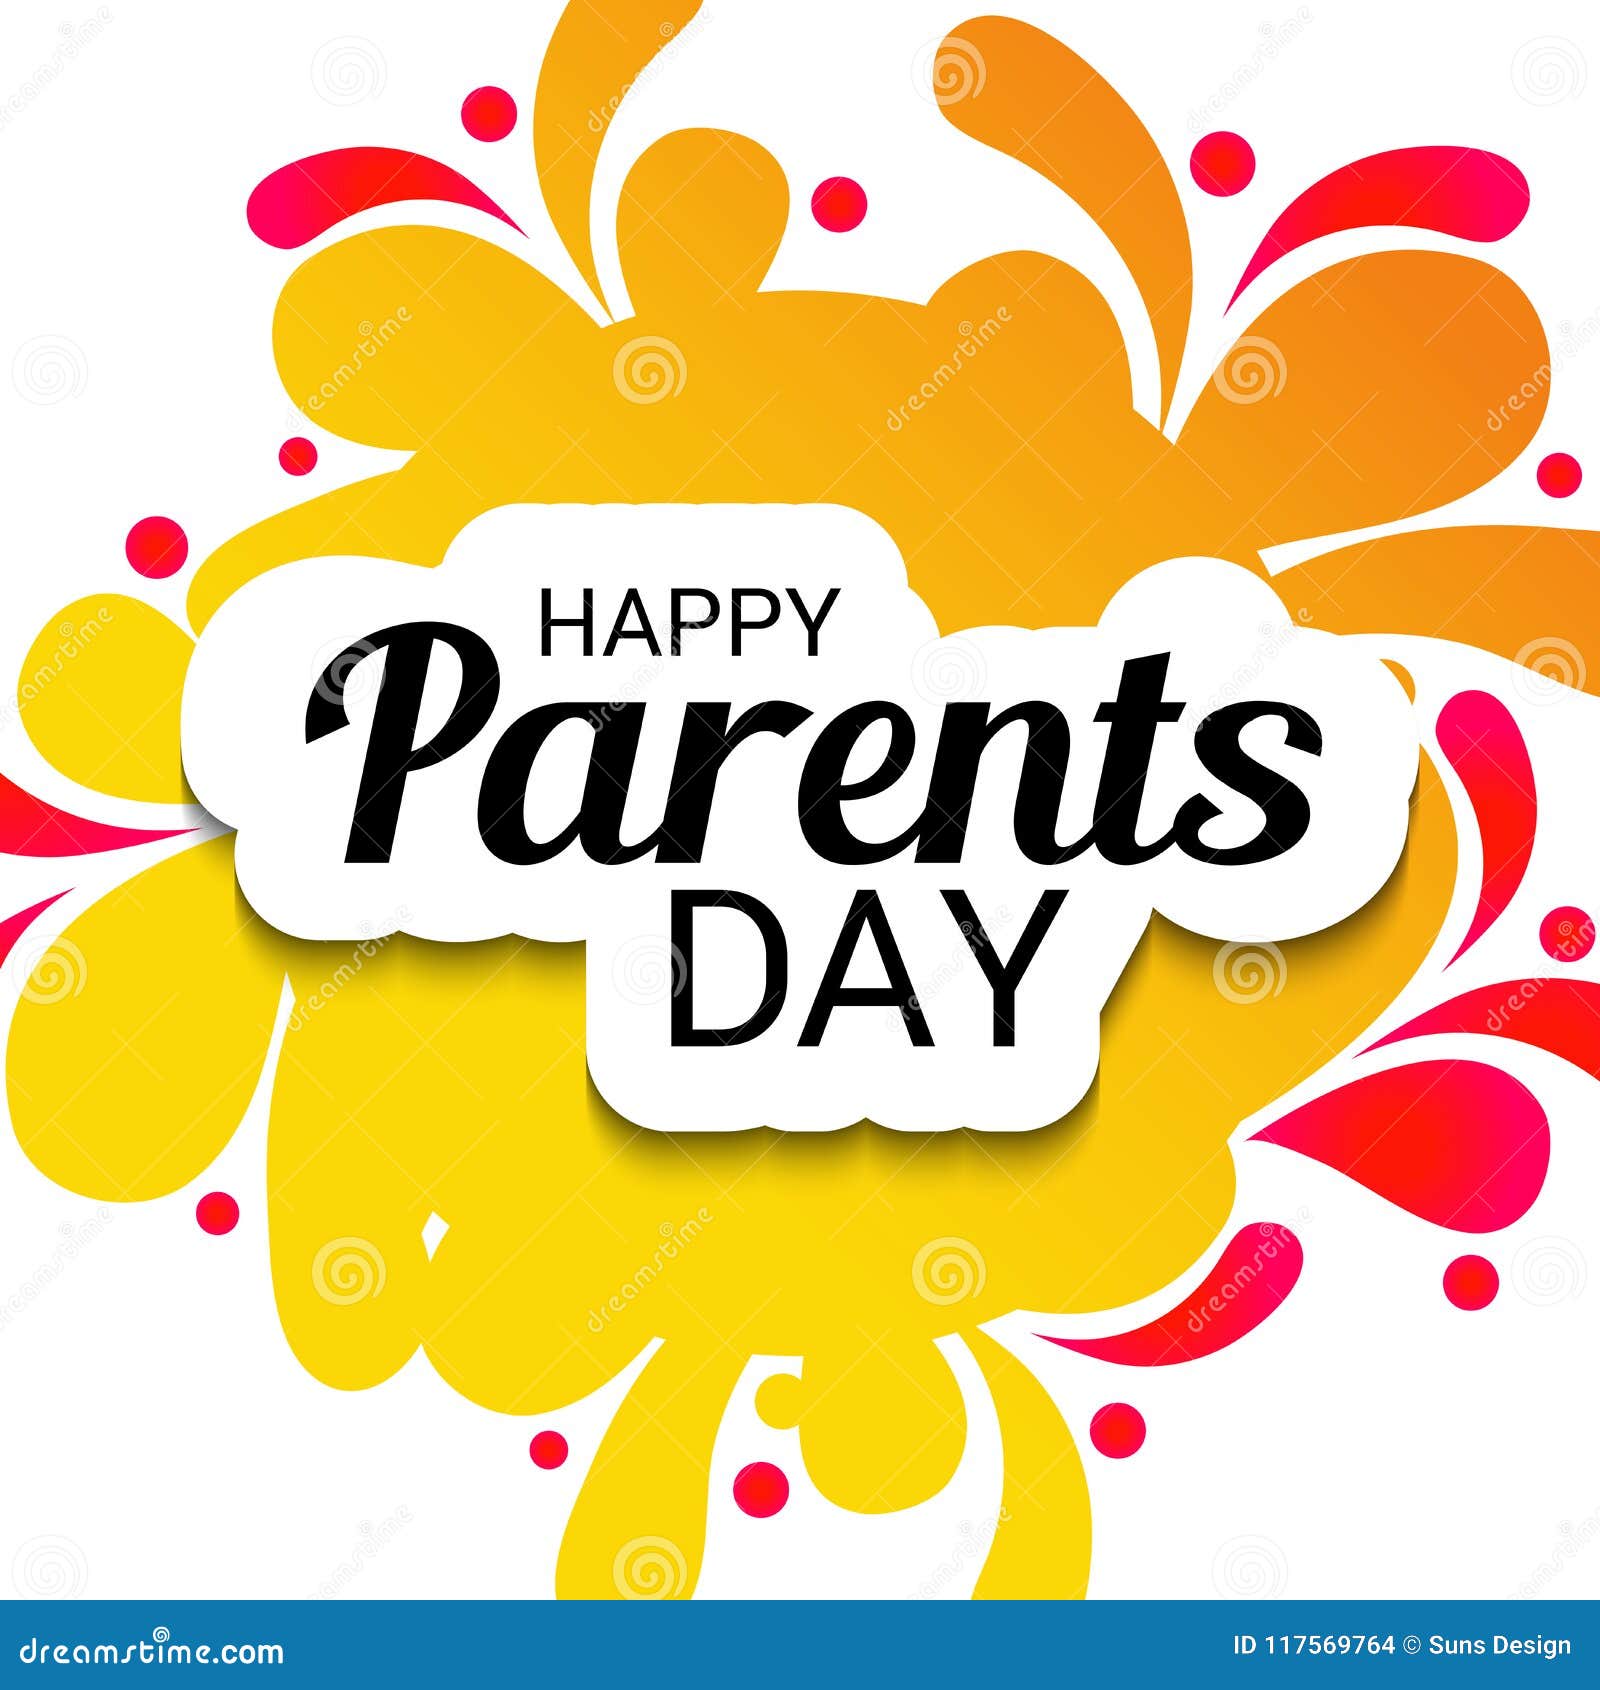 Image result for parents day